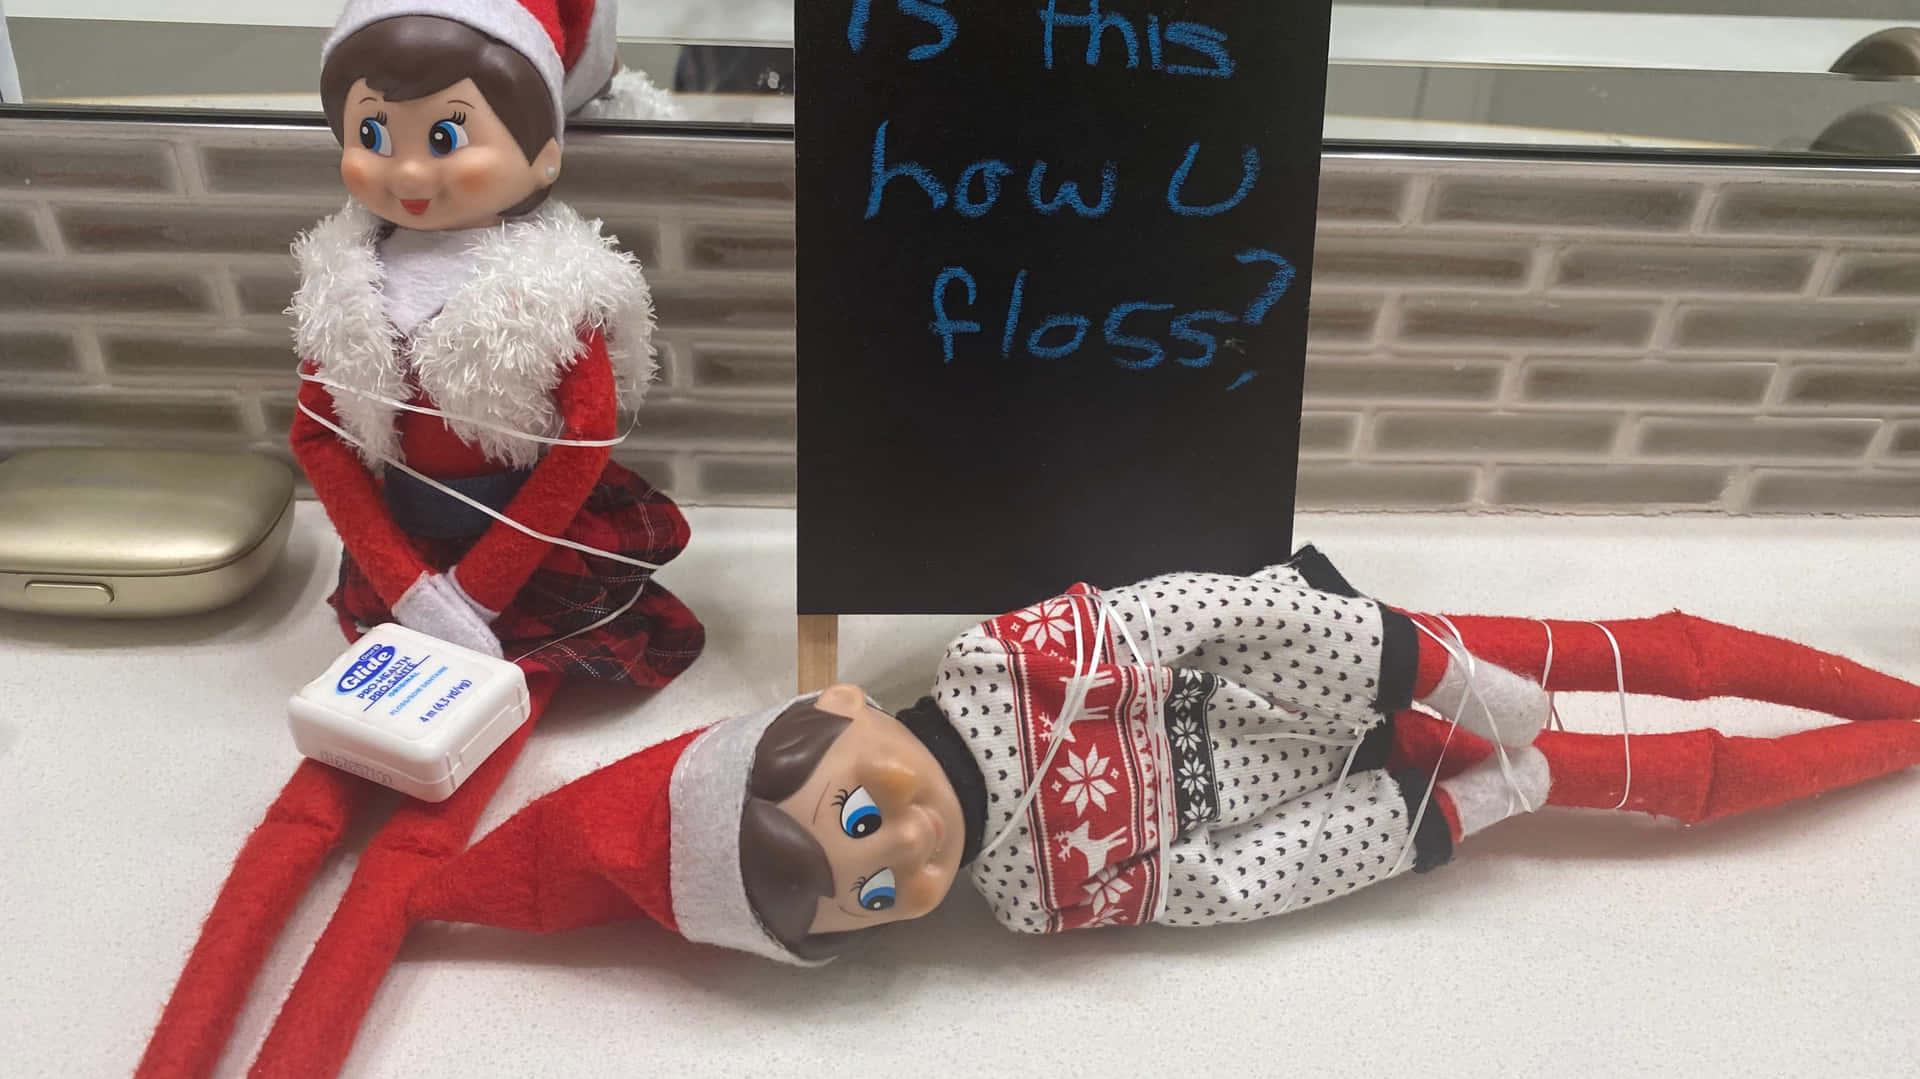 Download Elf On The Shelf With A Sign Saying How U Floss